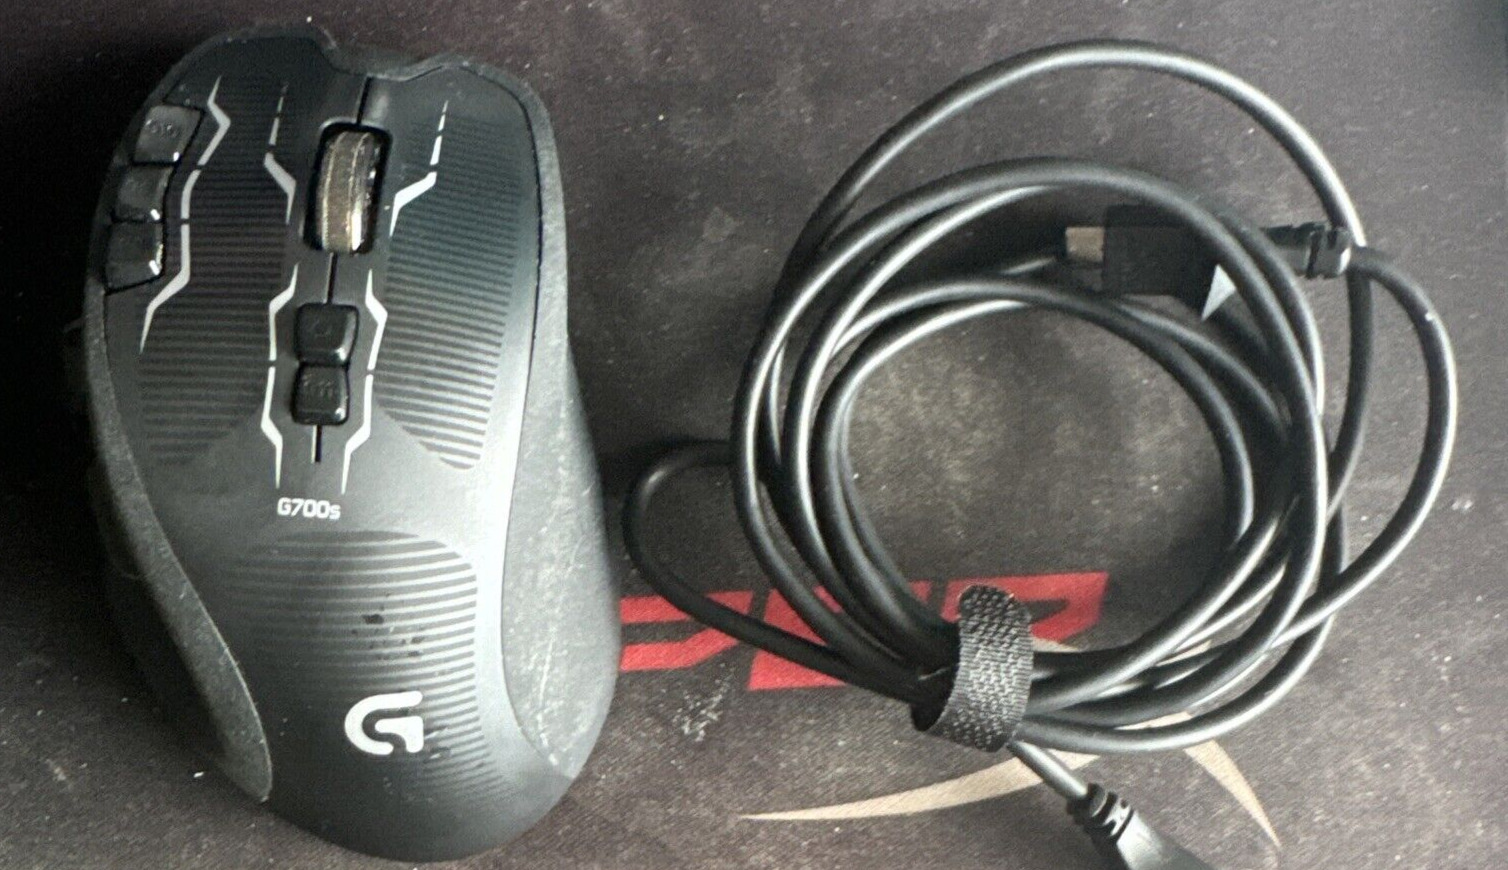 Logitech G700s Rechargeable Gaming Mouse Tested No Receiver